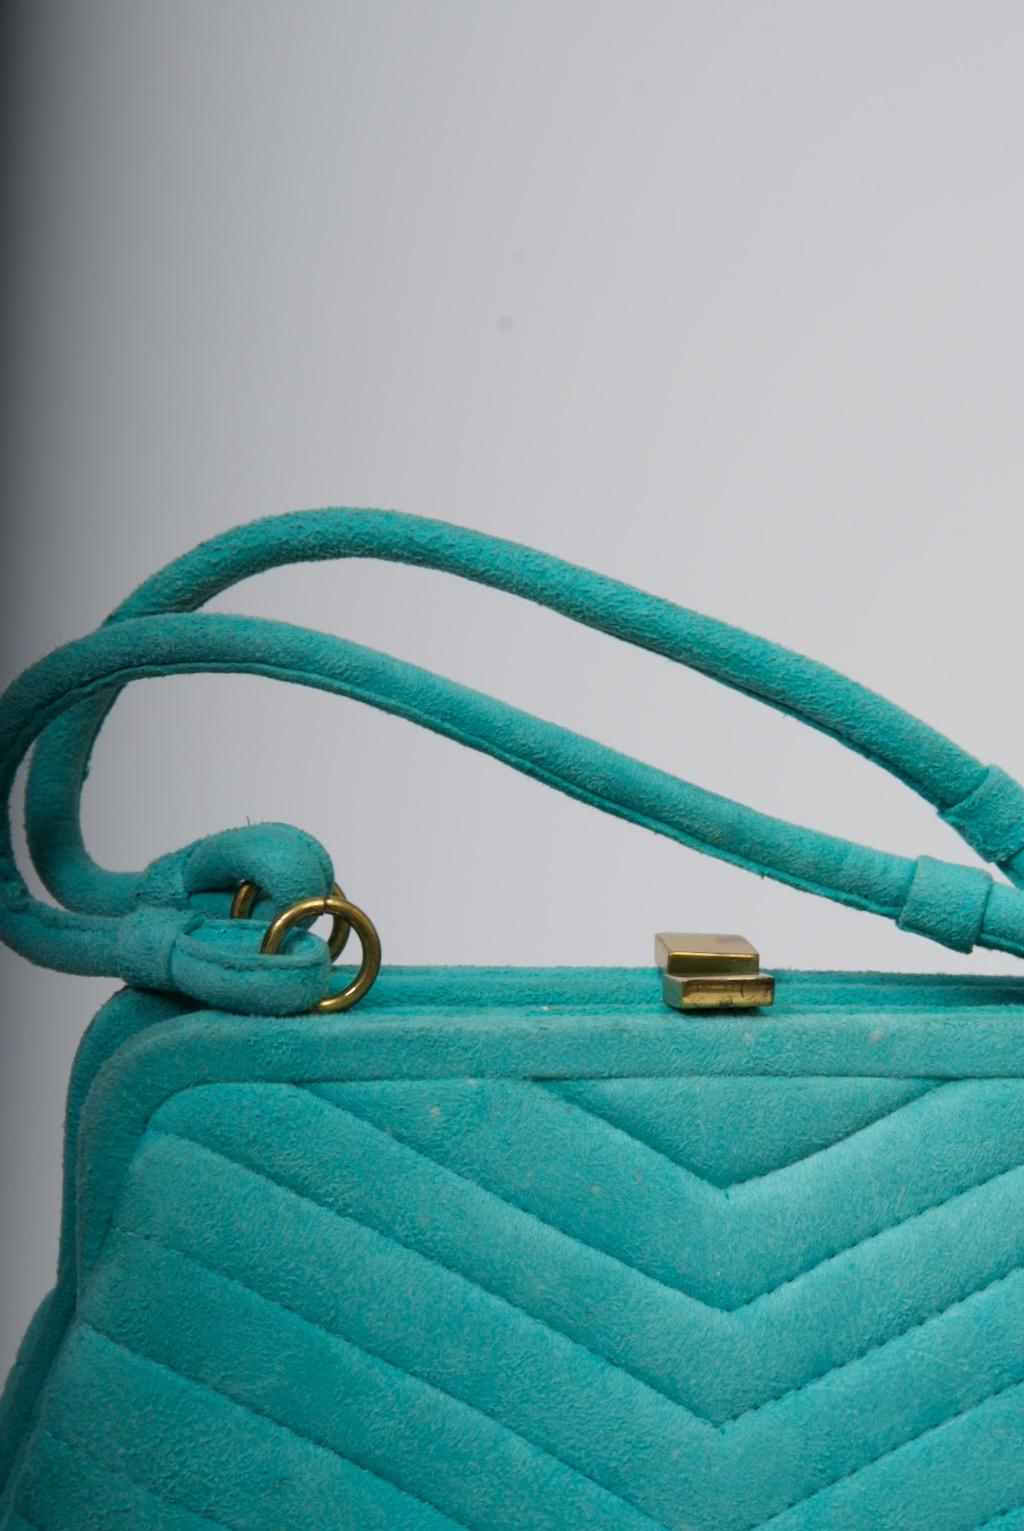 A unique find, this vintage handbag cannot fail to make you smile. Constructed of aqua suede that is channel-stitched in an inverted V-pattern, it is composed of two separate and conjoined purses, each with its own matching handle and simple gold